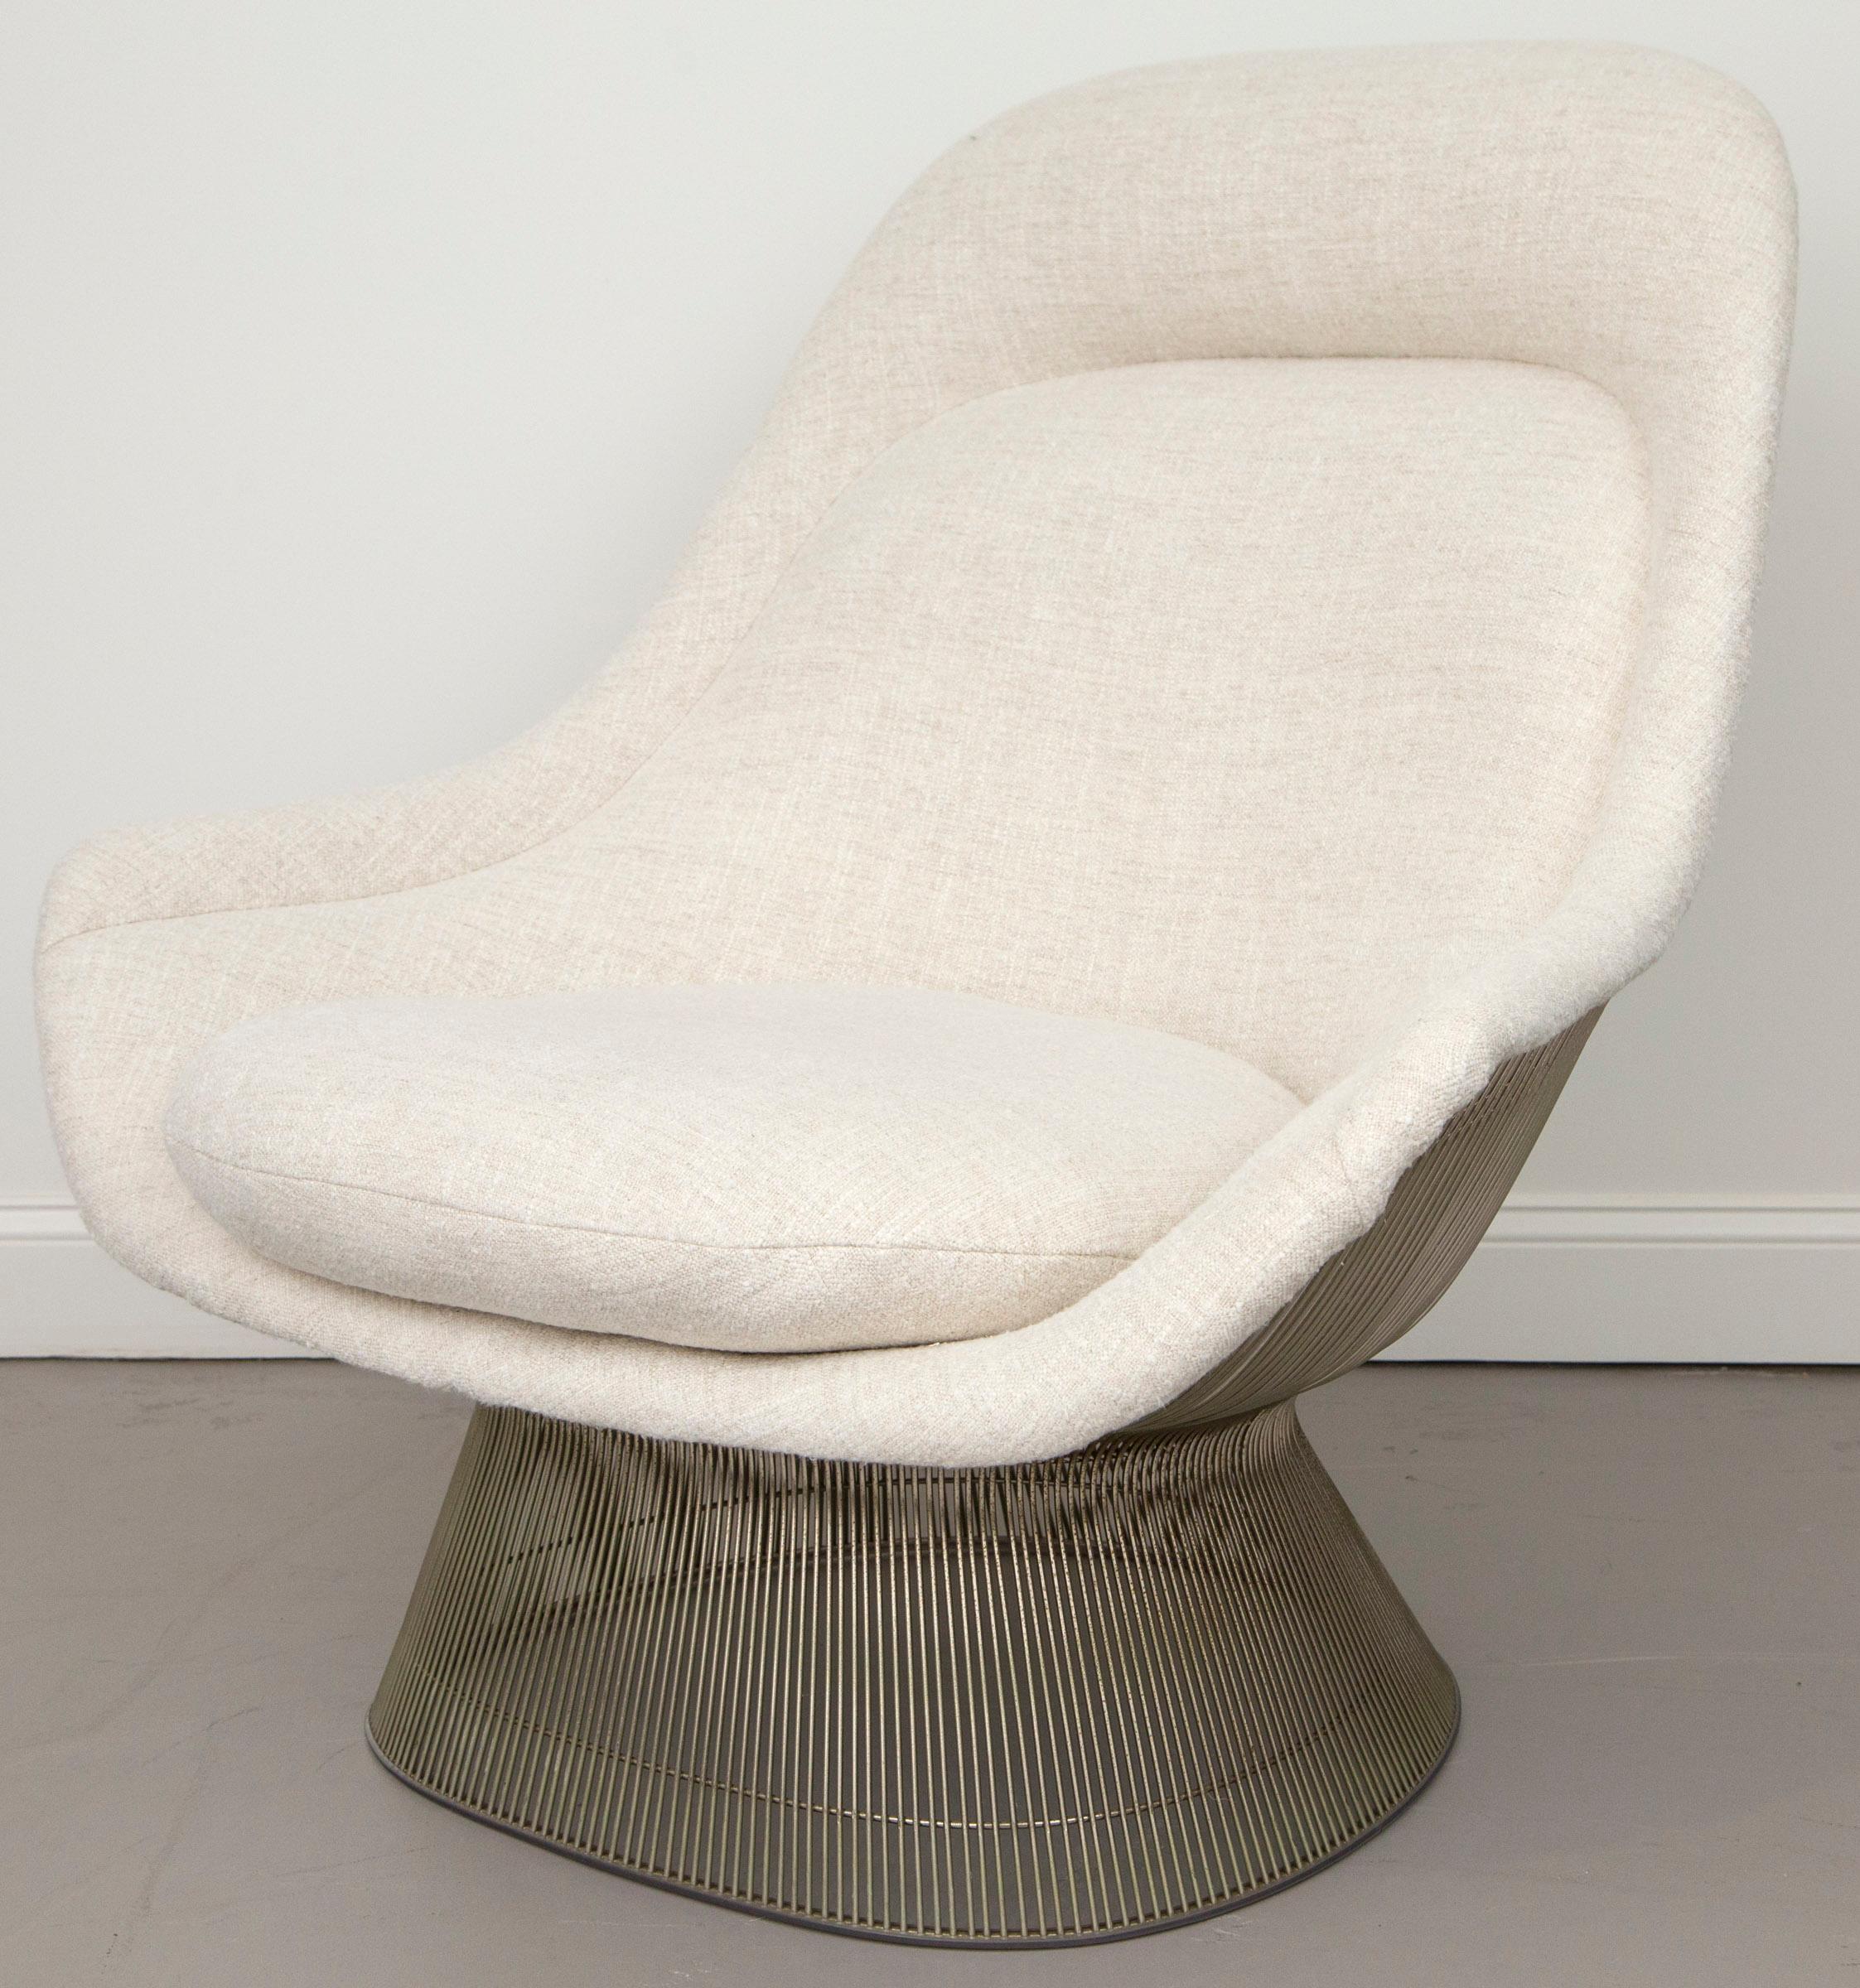 Mid-Century Modern Warren Platner for Knoll Chair Reupholstered in New Maharam Wool Fabric For Sale